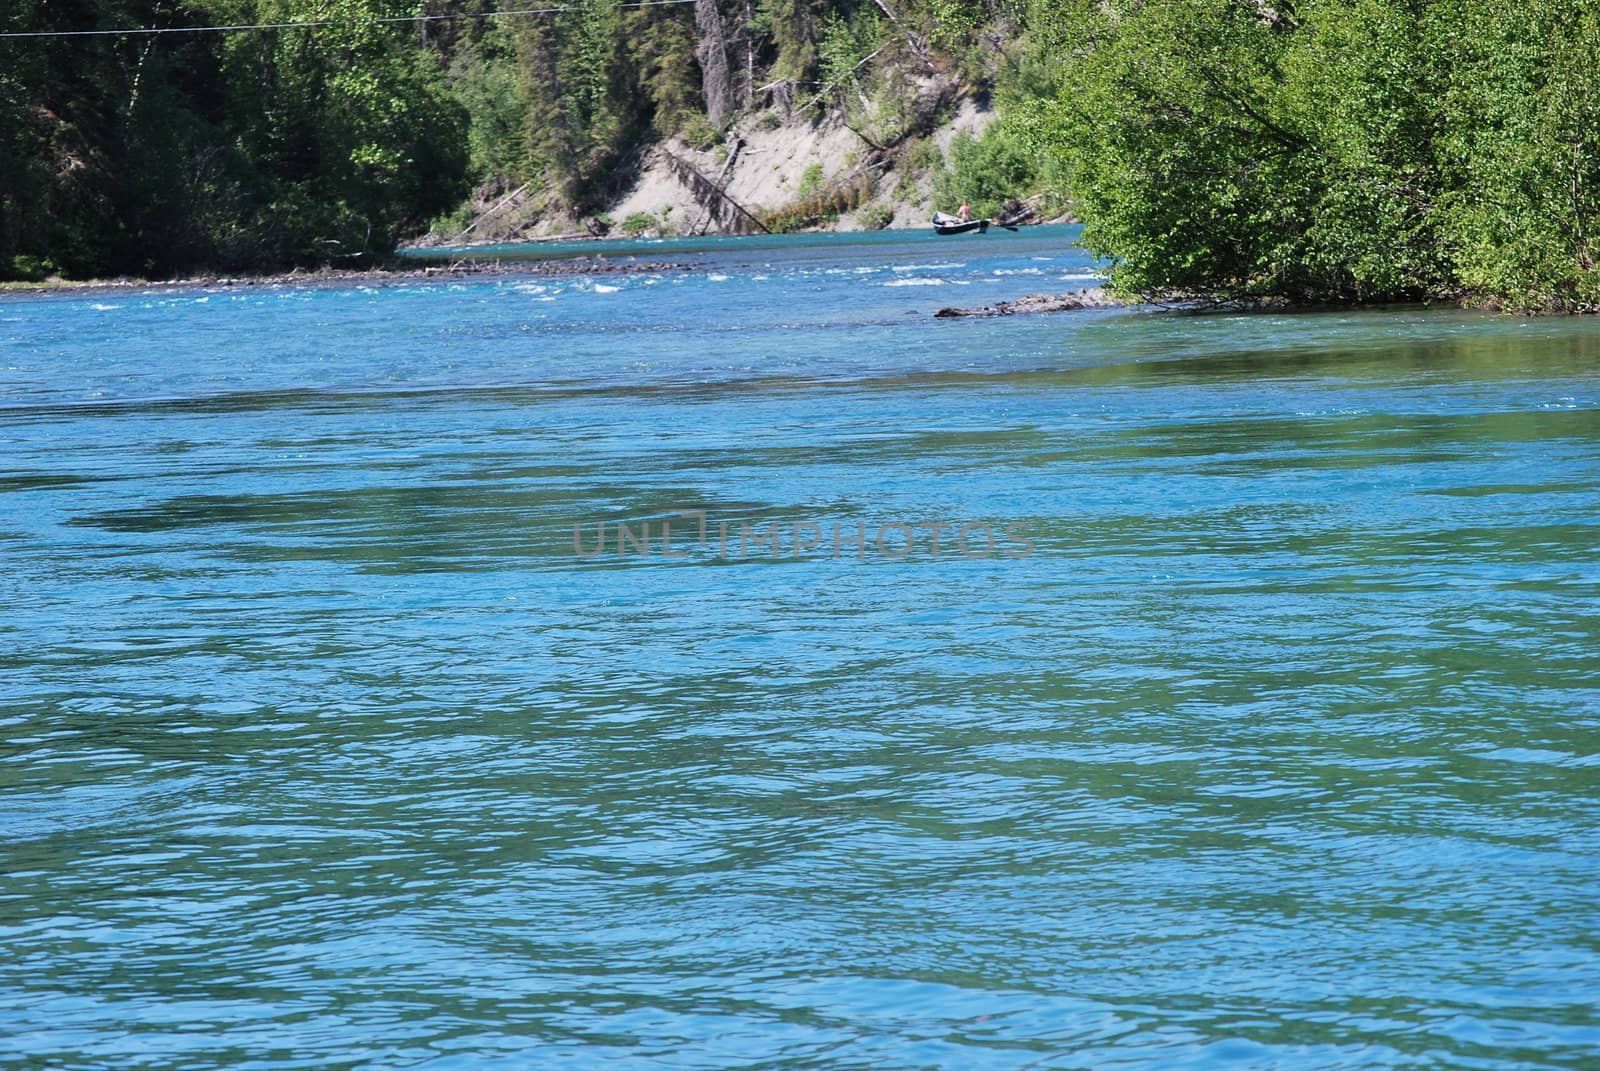 Showing the teal blue waters of the Kenai River in Alaska